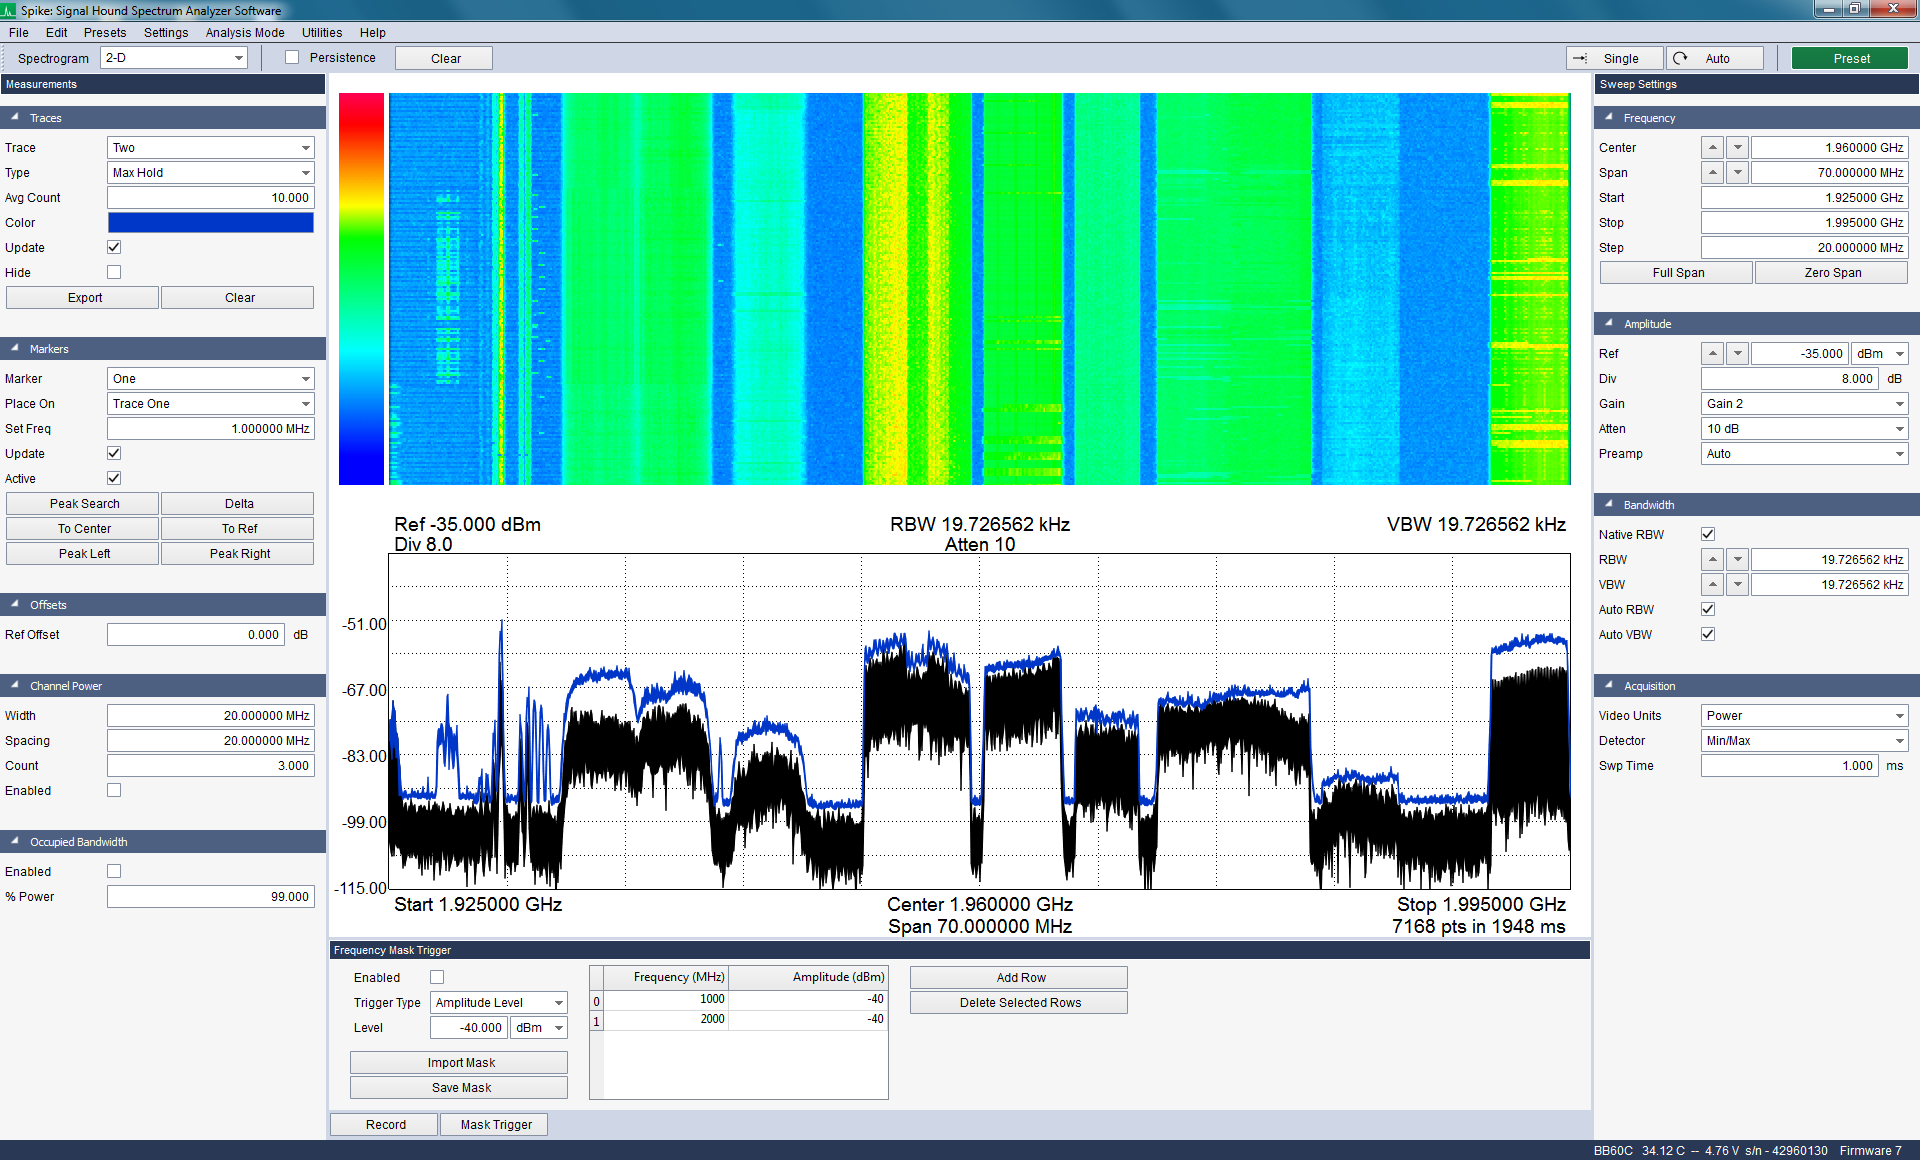 Monitoring a number of cellular frequency bands